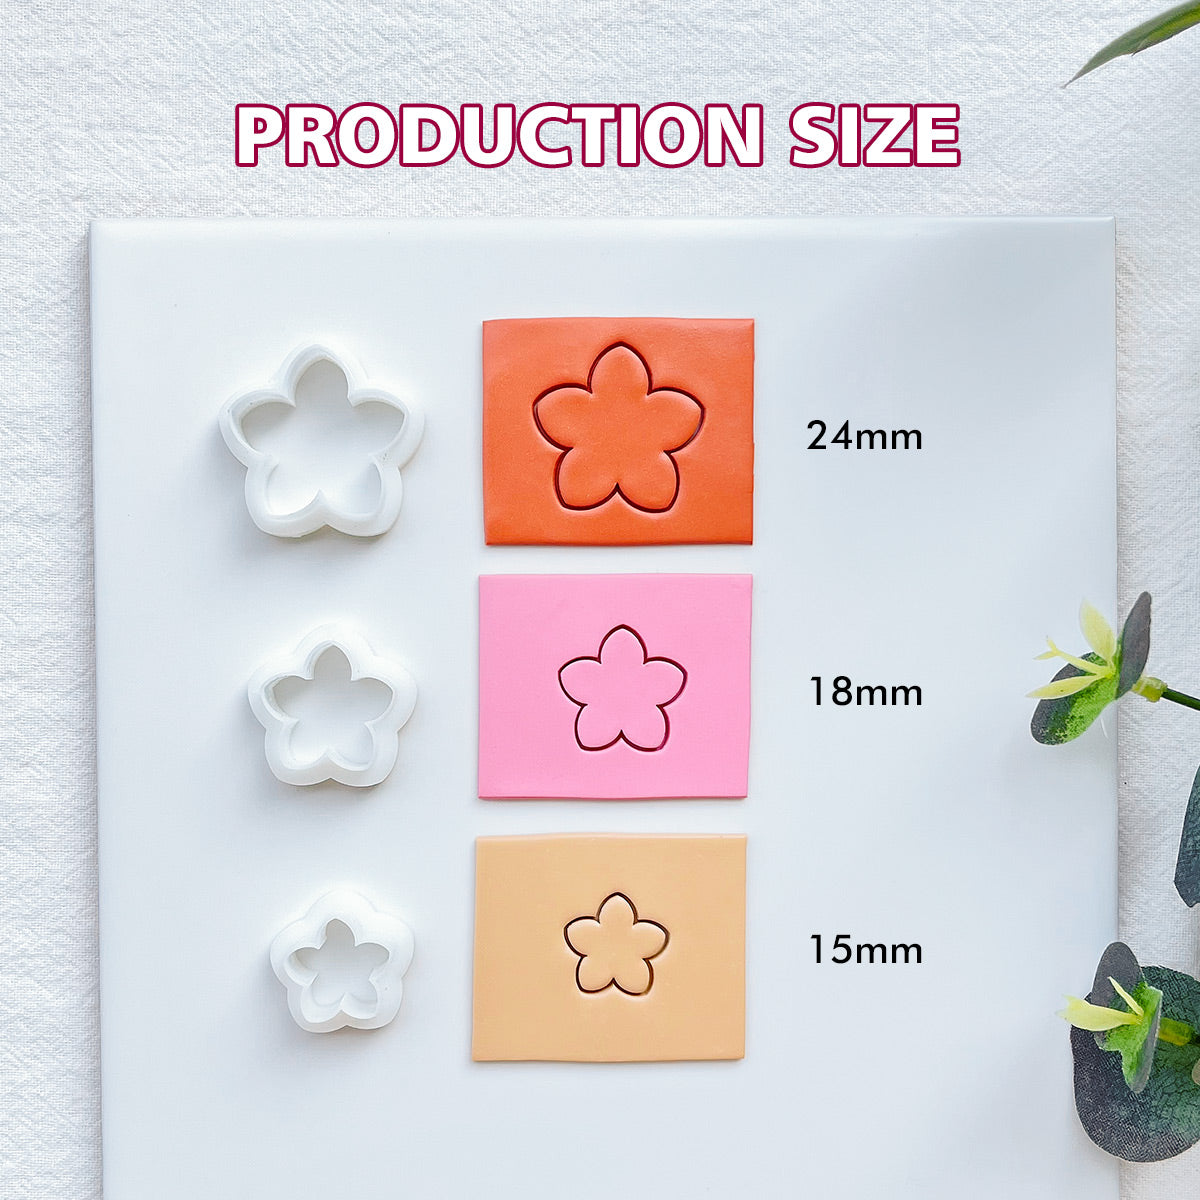 Petal Polymer Clay Cutters - Flower Petals Clay Cutters for